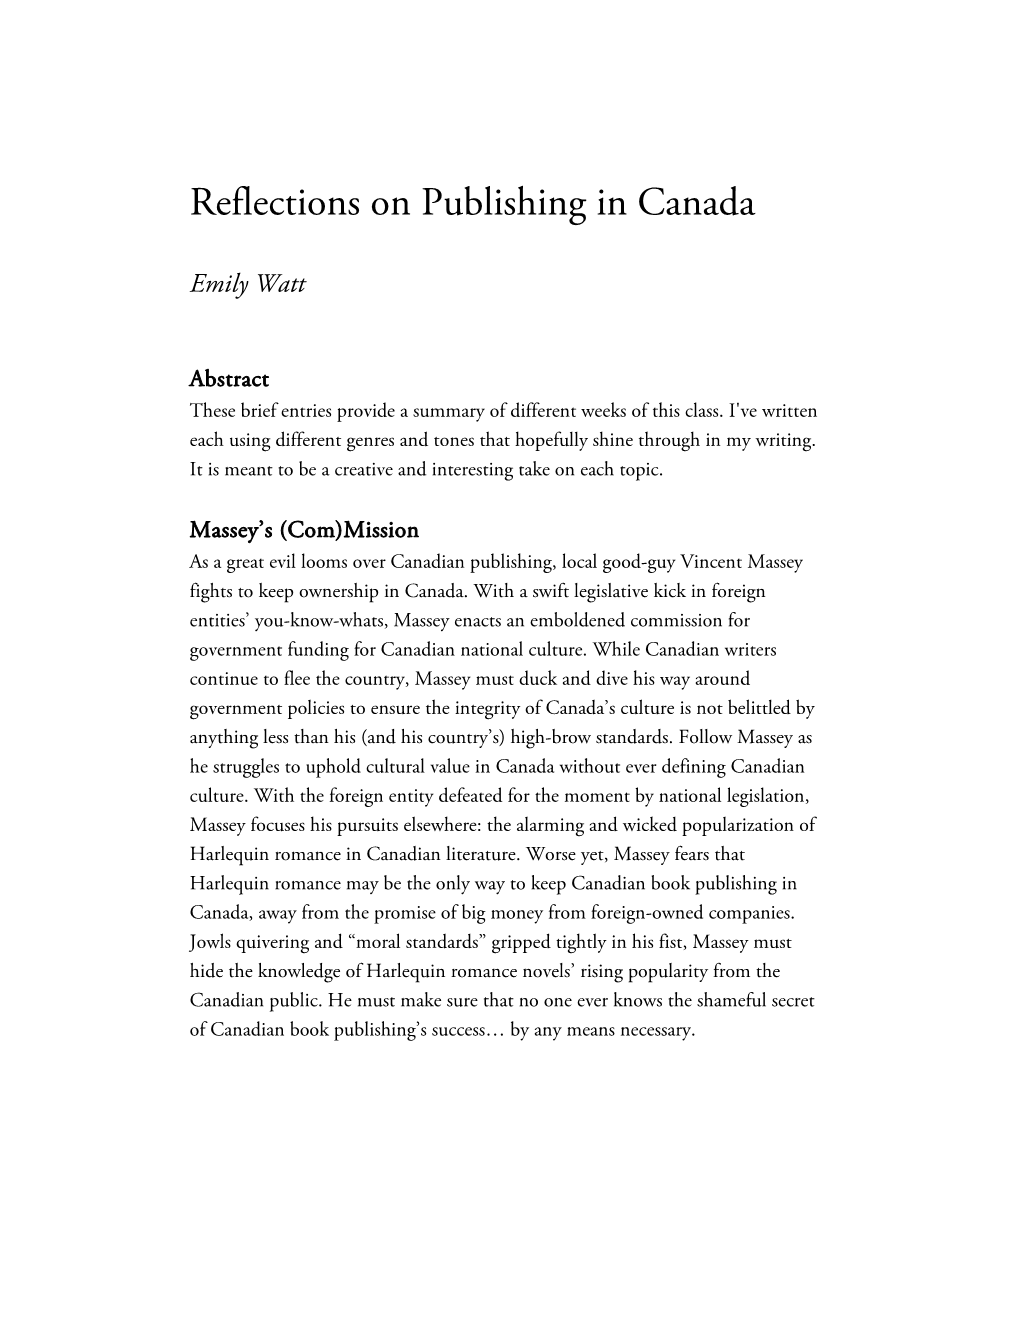 Reflections on Publishing in Canada